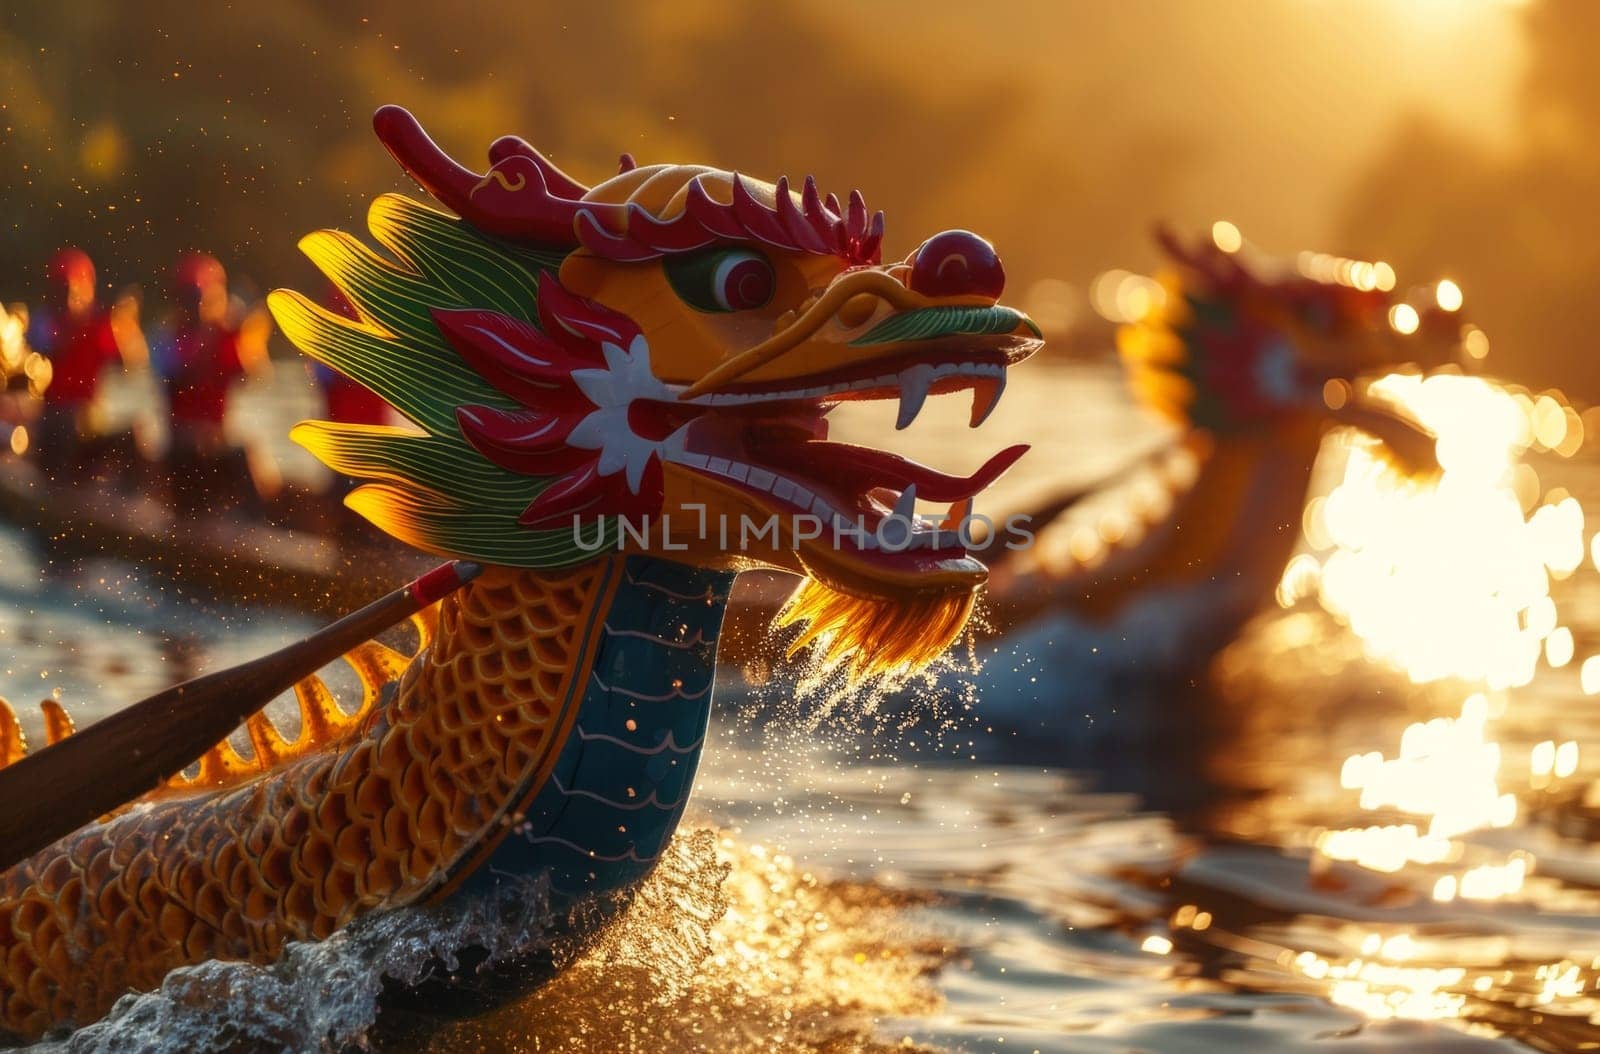 The golden hour illuminates a dragon boat race, with rowers in sync and water sparkling, capturing the spirit of this vibrant cultural event. Asian festival.